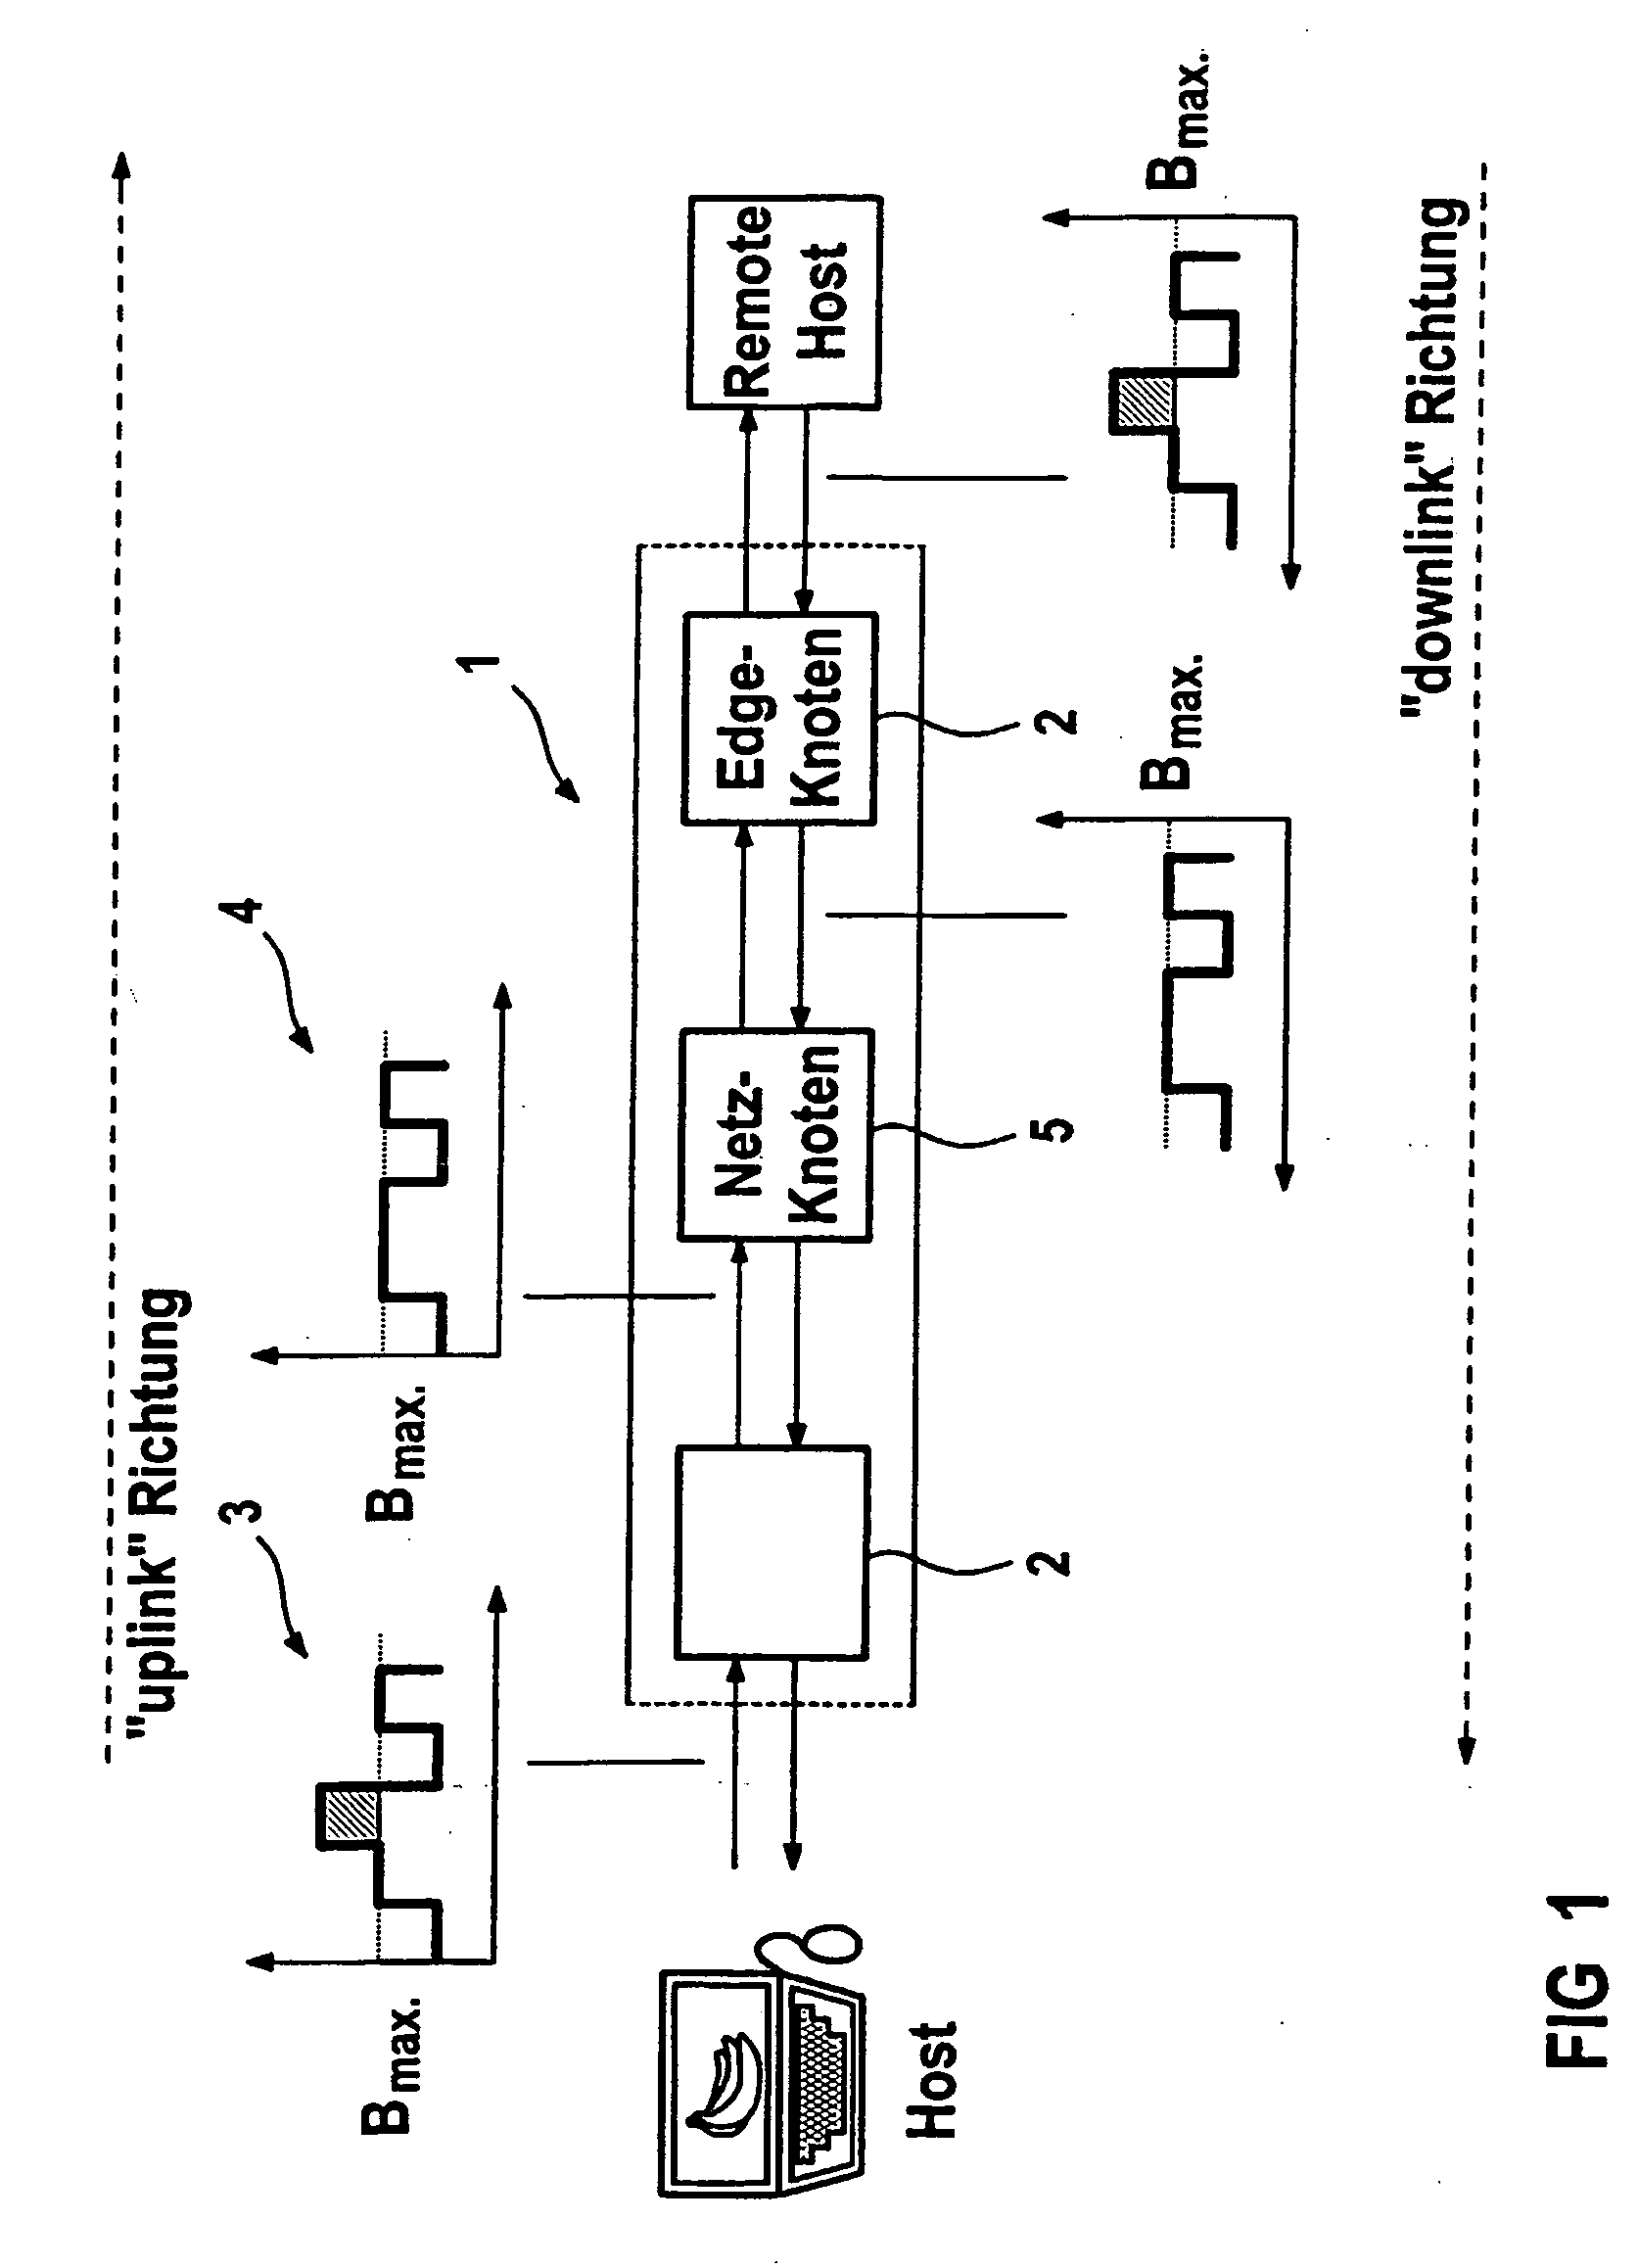 Method for transmitting data from applications with different quality